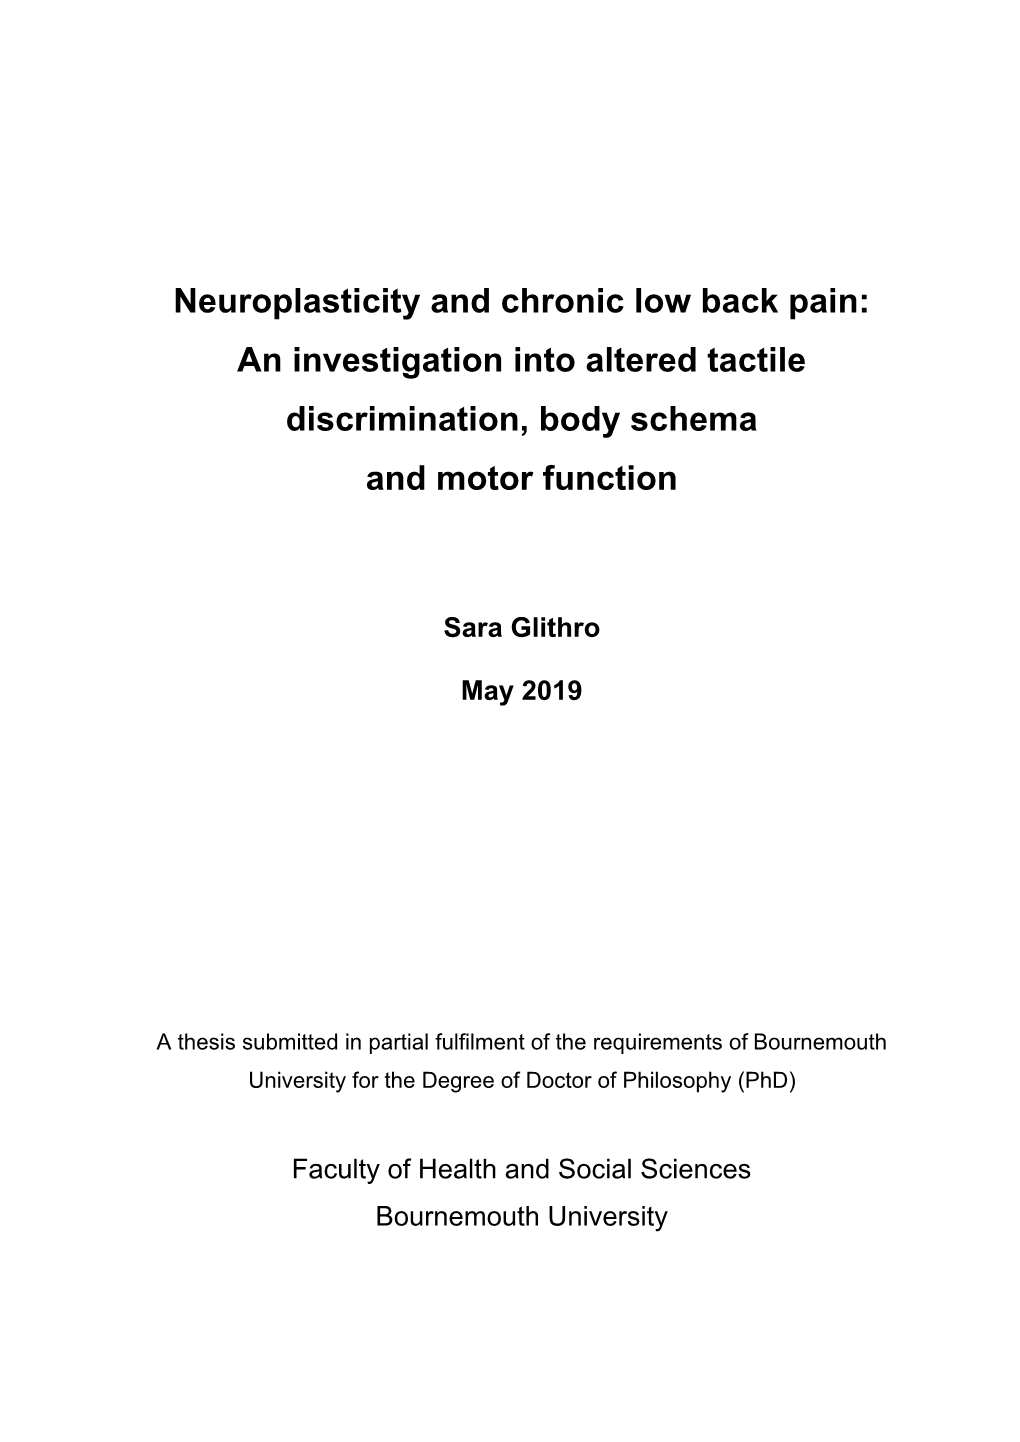 Neuroplasticity and Chronic Low Back Pain: an Investigation Into Altered Tactile Discrimination, Body Schema and Motor Function